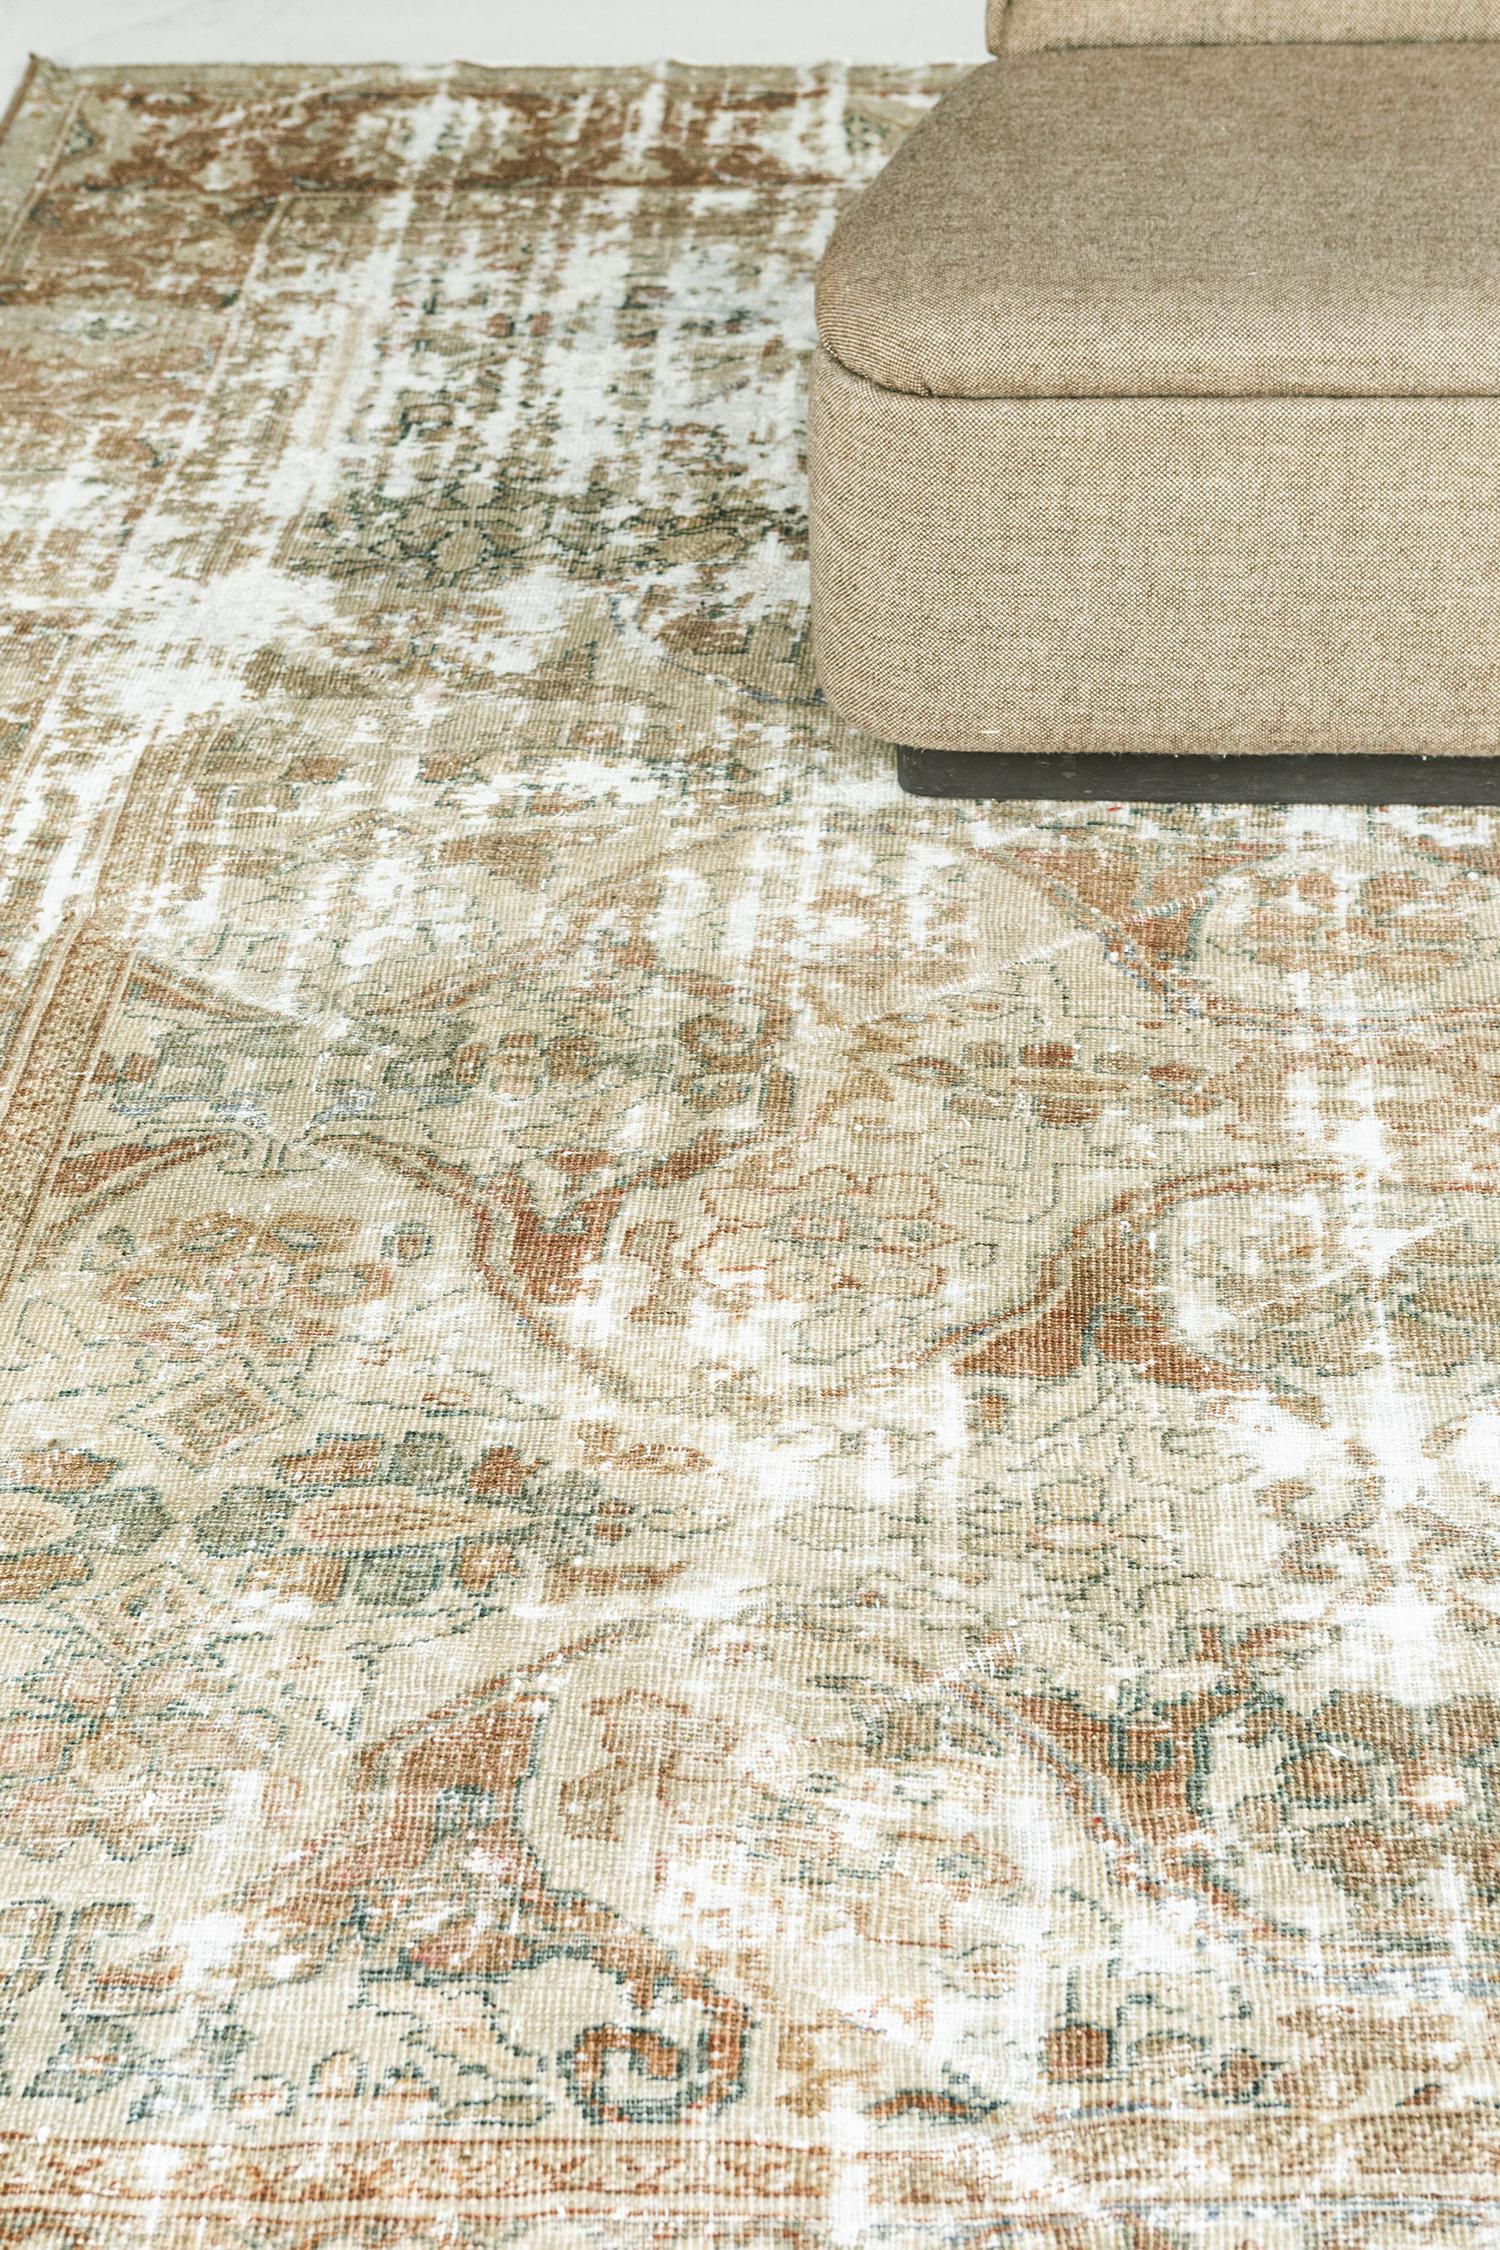 A antique Persian Sultanabad with beautiful vine work in the perfect distressed finish. Luxurious wools in various neutrals create a cohesive and timely design. Sultanabad in northwest Iran (current day Arak), was a prominent center of village and